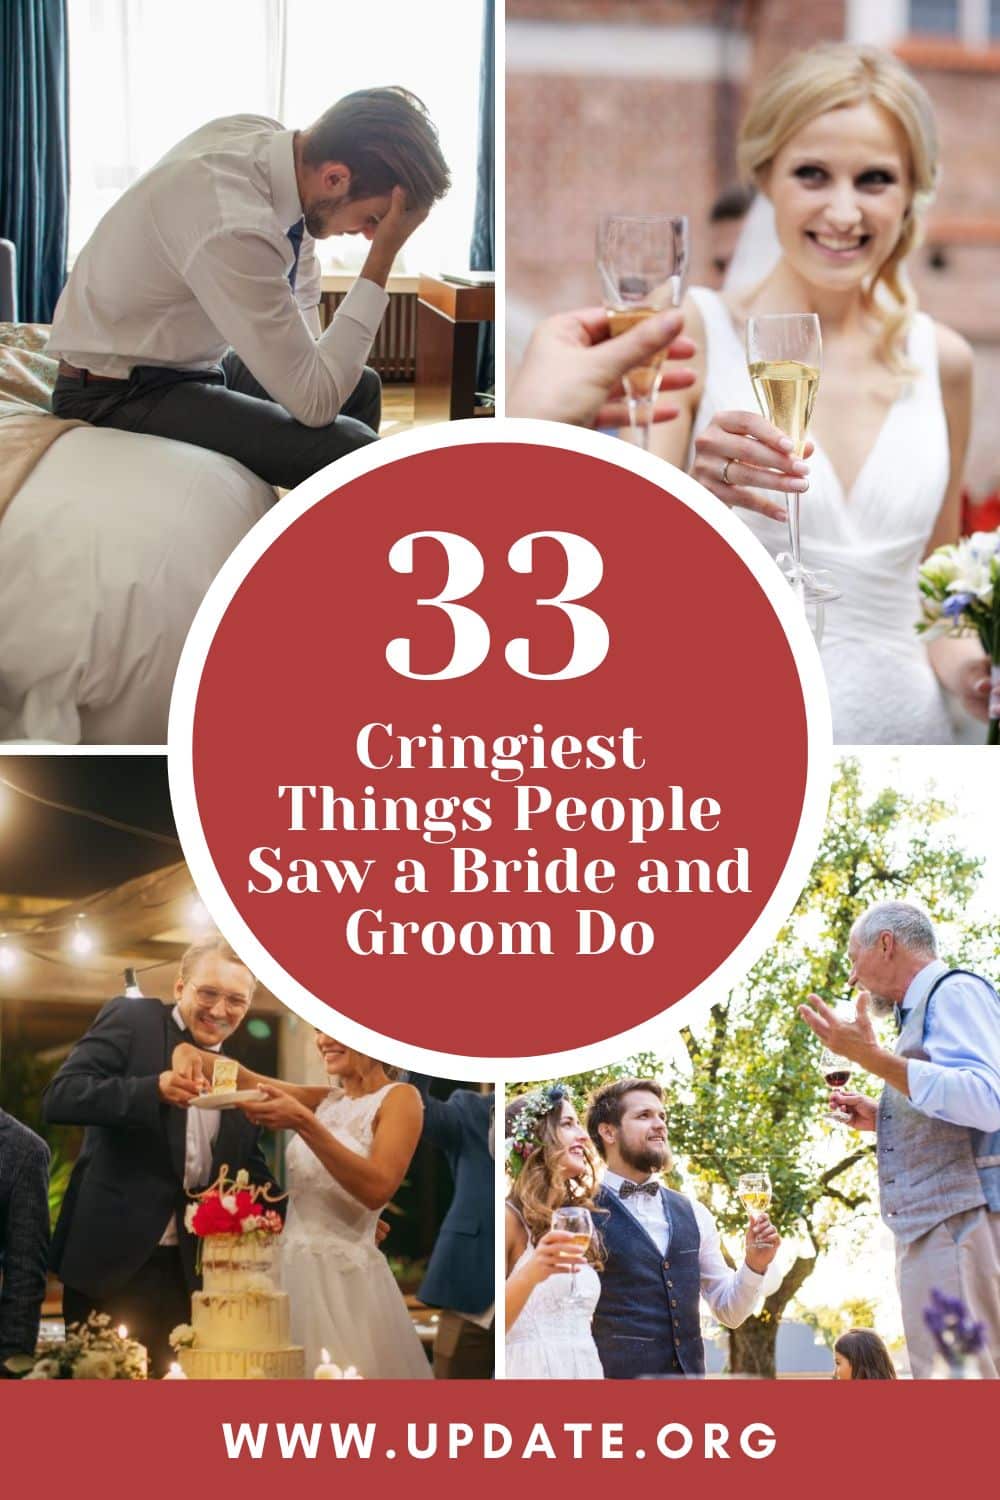 33 Cringiest Things People Saw a Bride and Groom Do pinterest image.